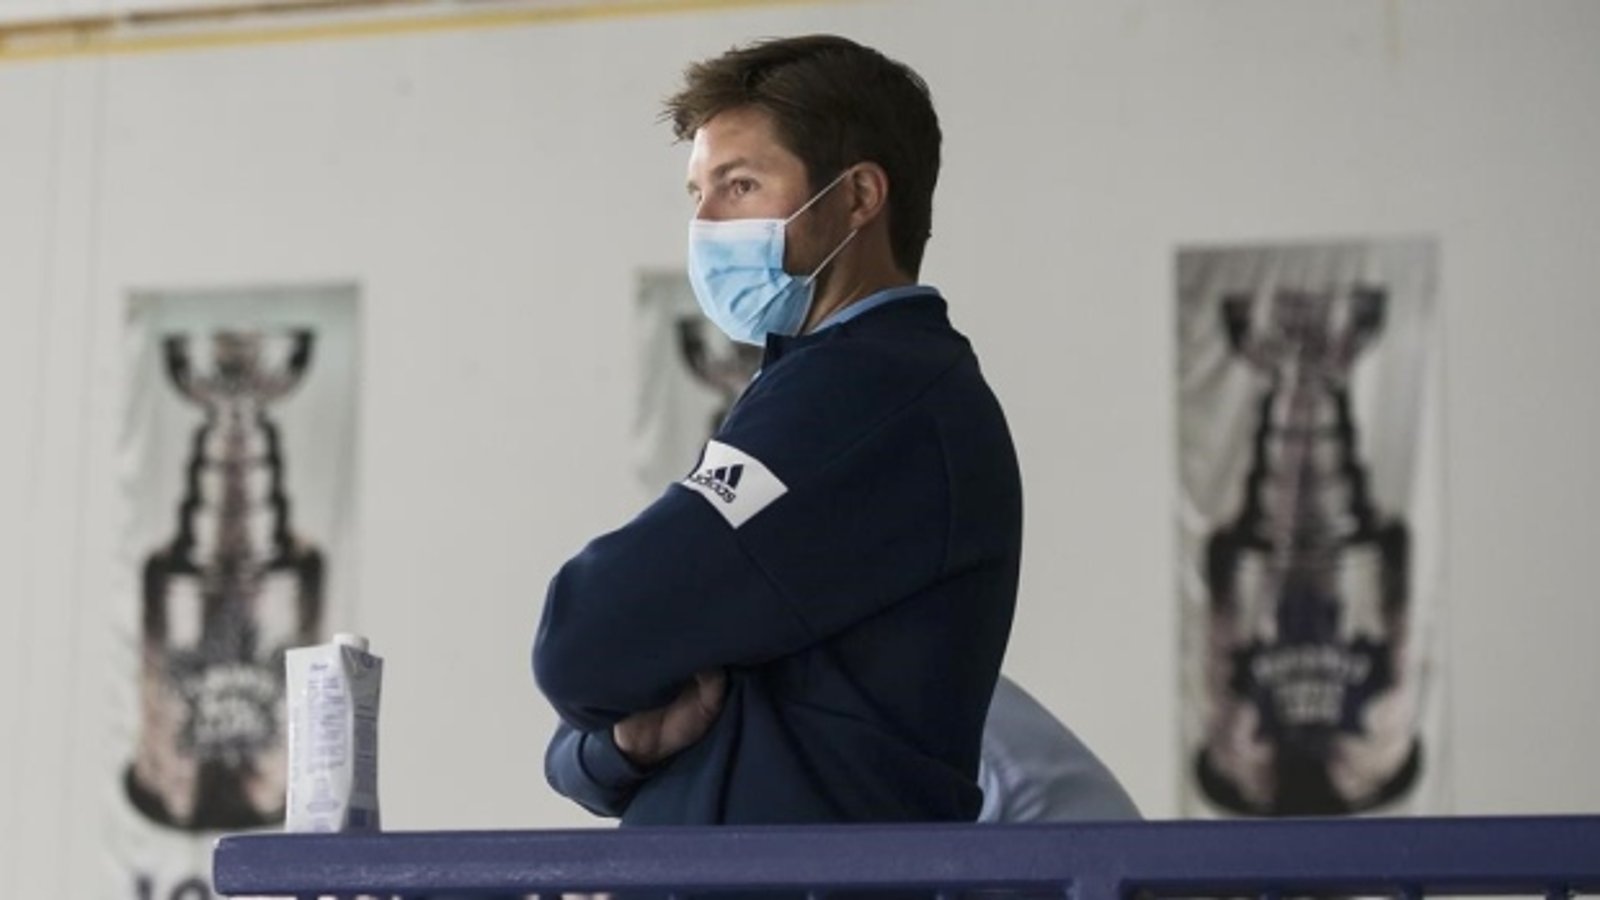 Dubas after Canucks’ outbreak messed the schedule: “Why are we getting f*cked?”